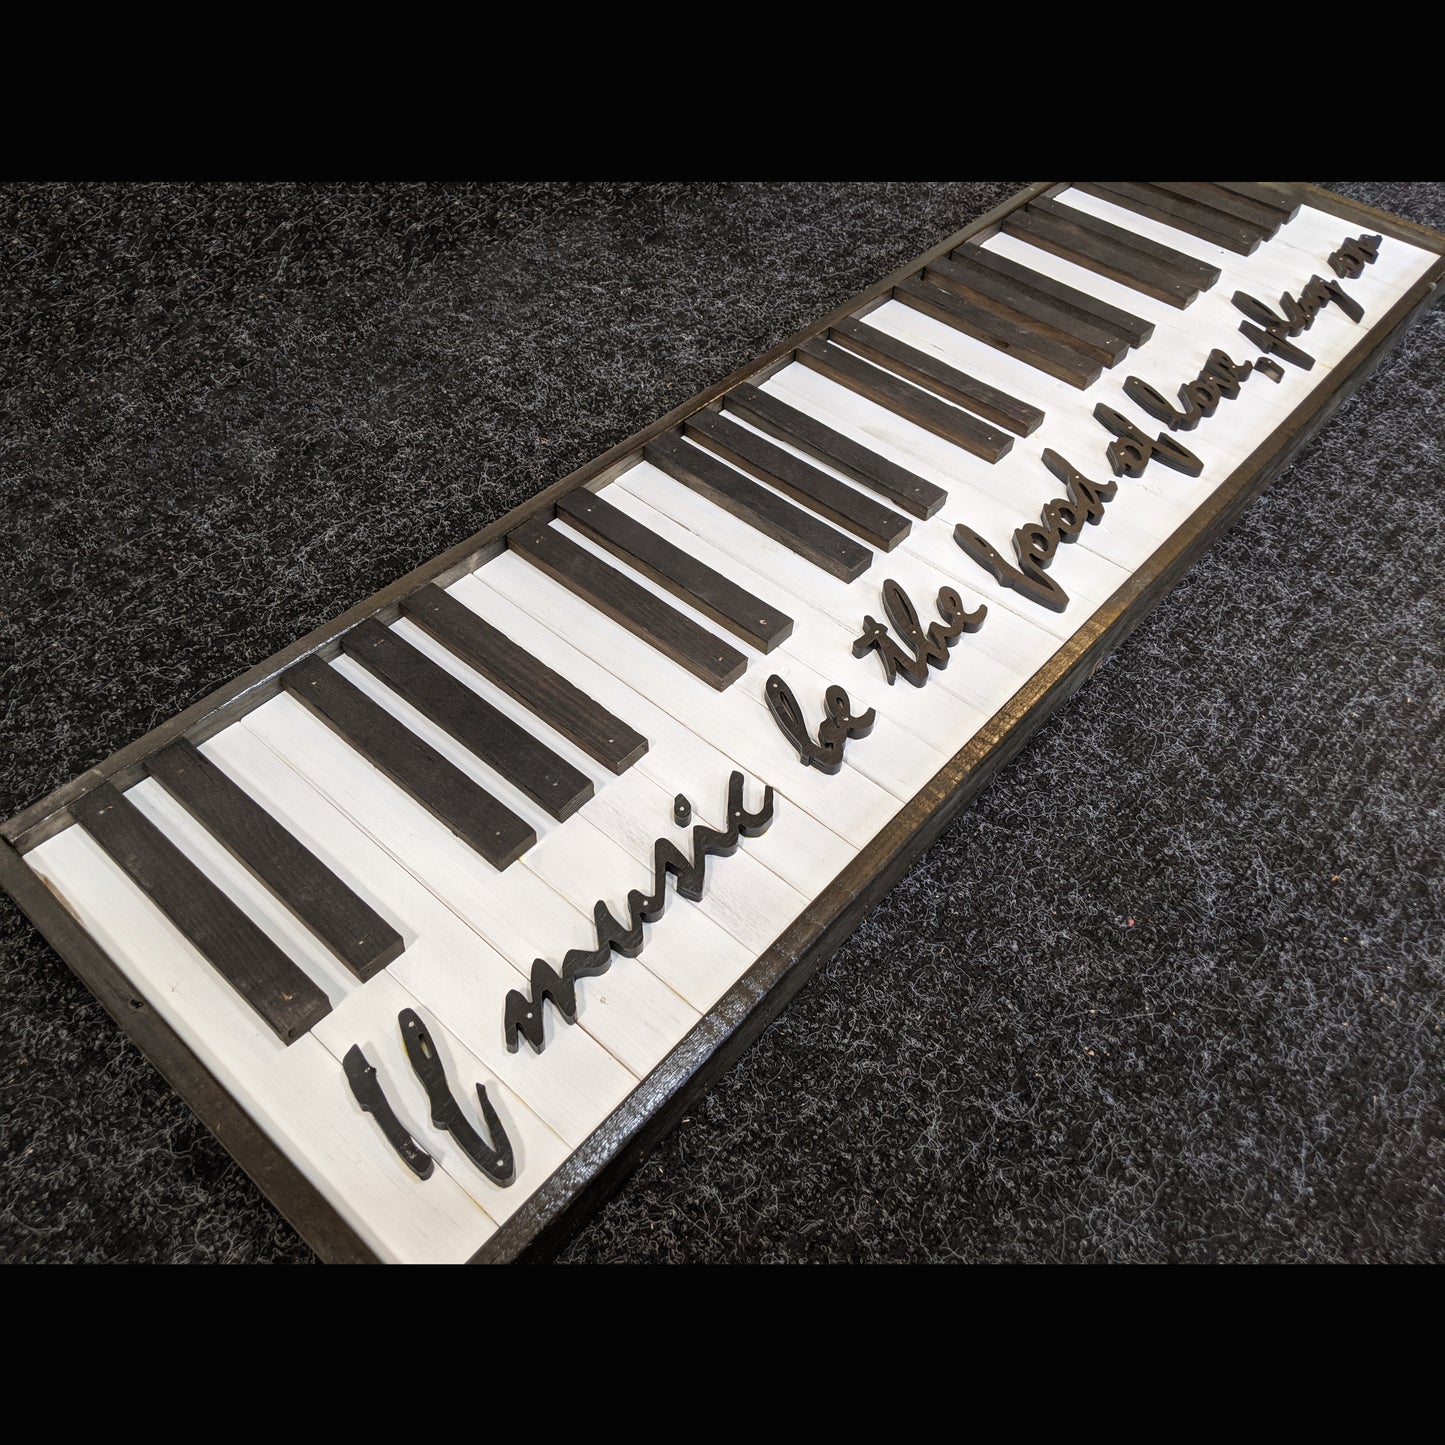 Reclaimed one-of-a-kind wooden piano artwork